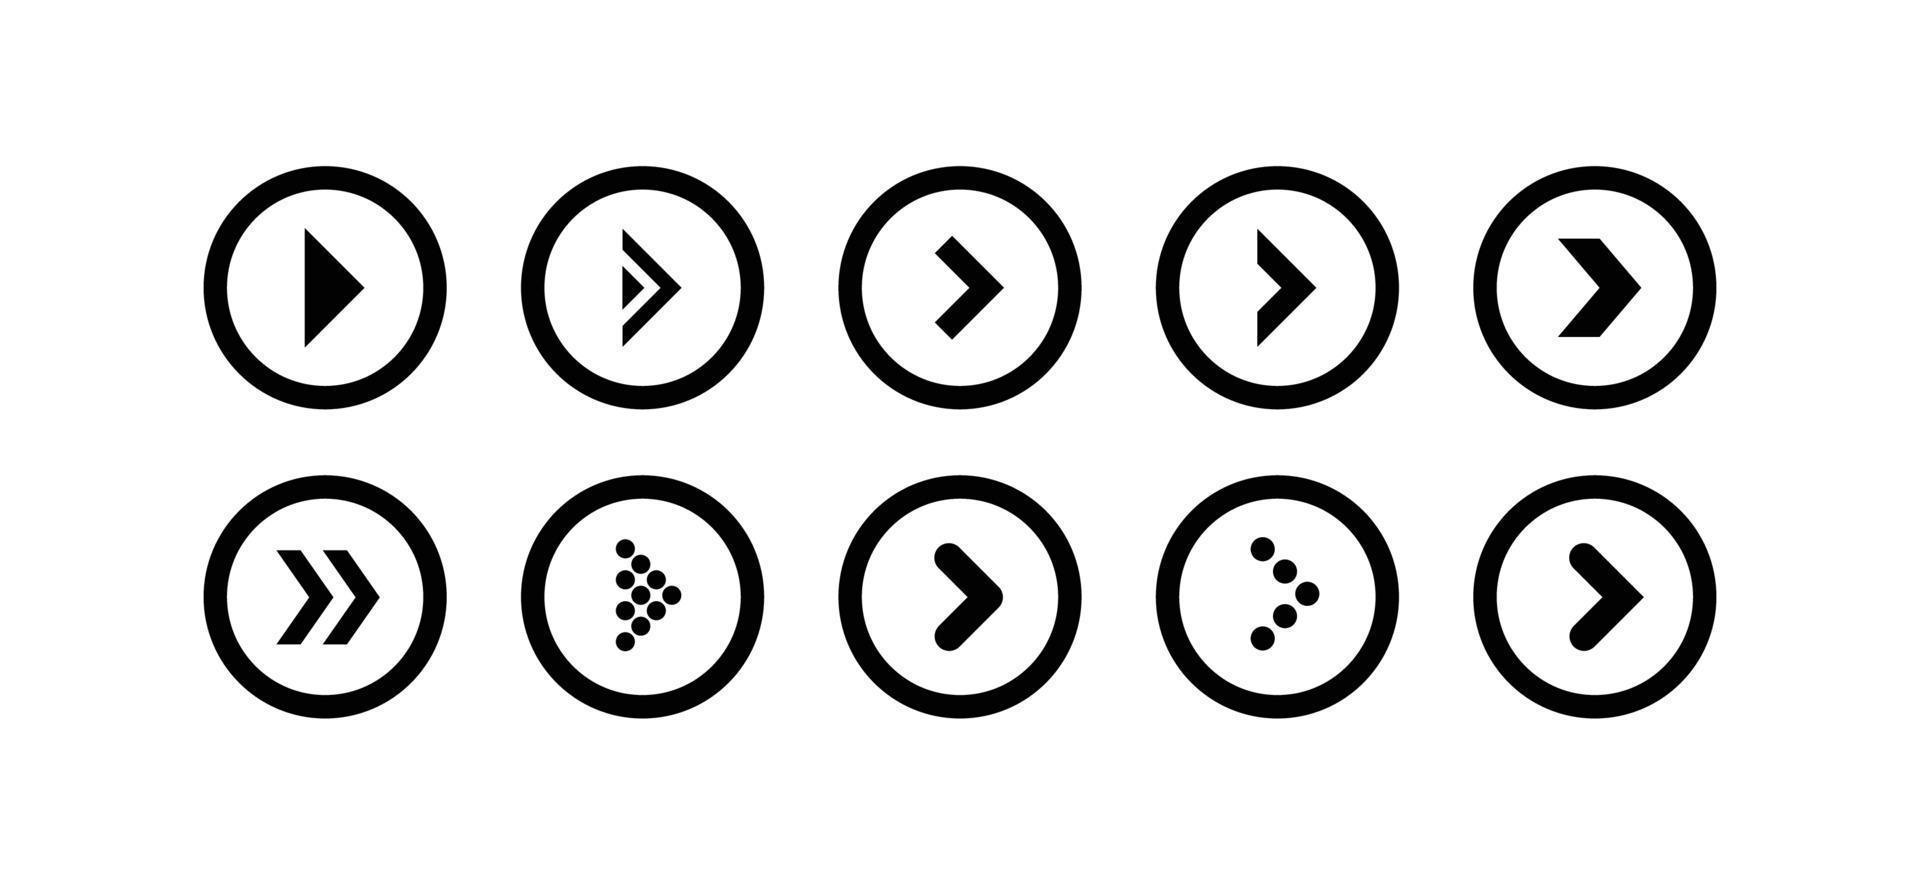 Set of black arrow illustration icons in the shape of a circle. vector